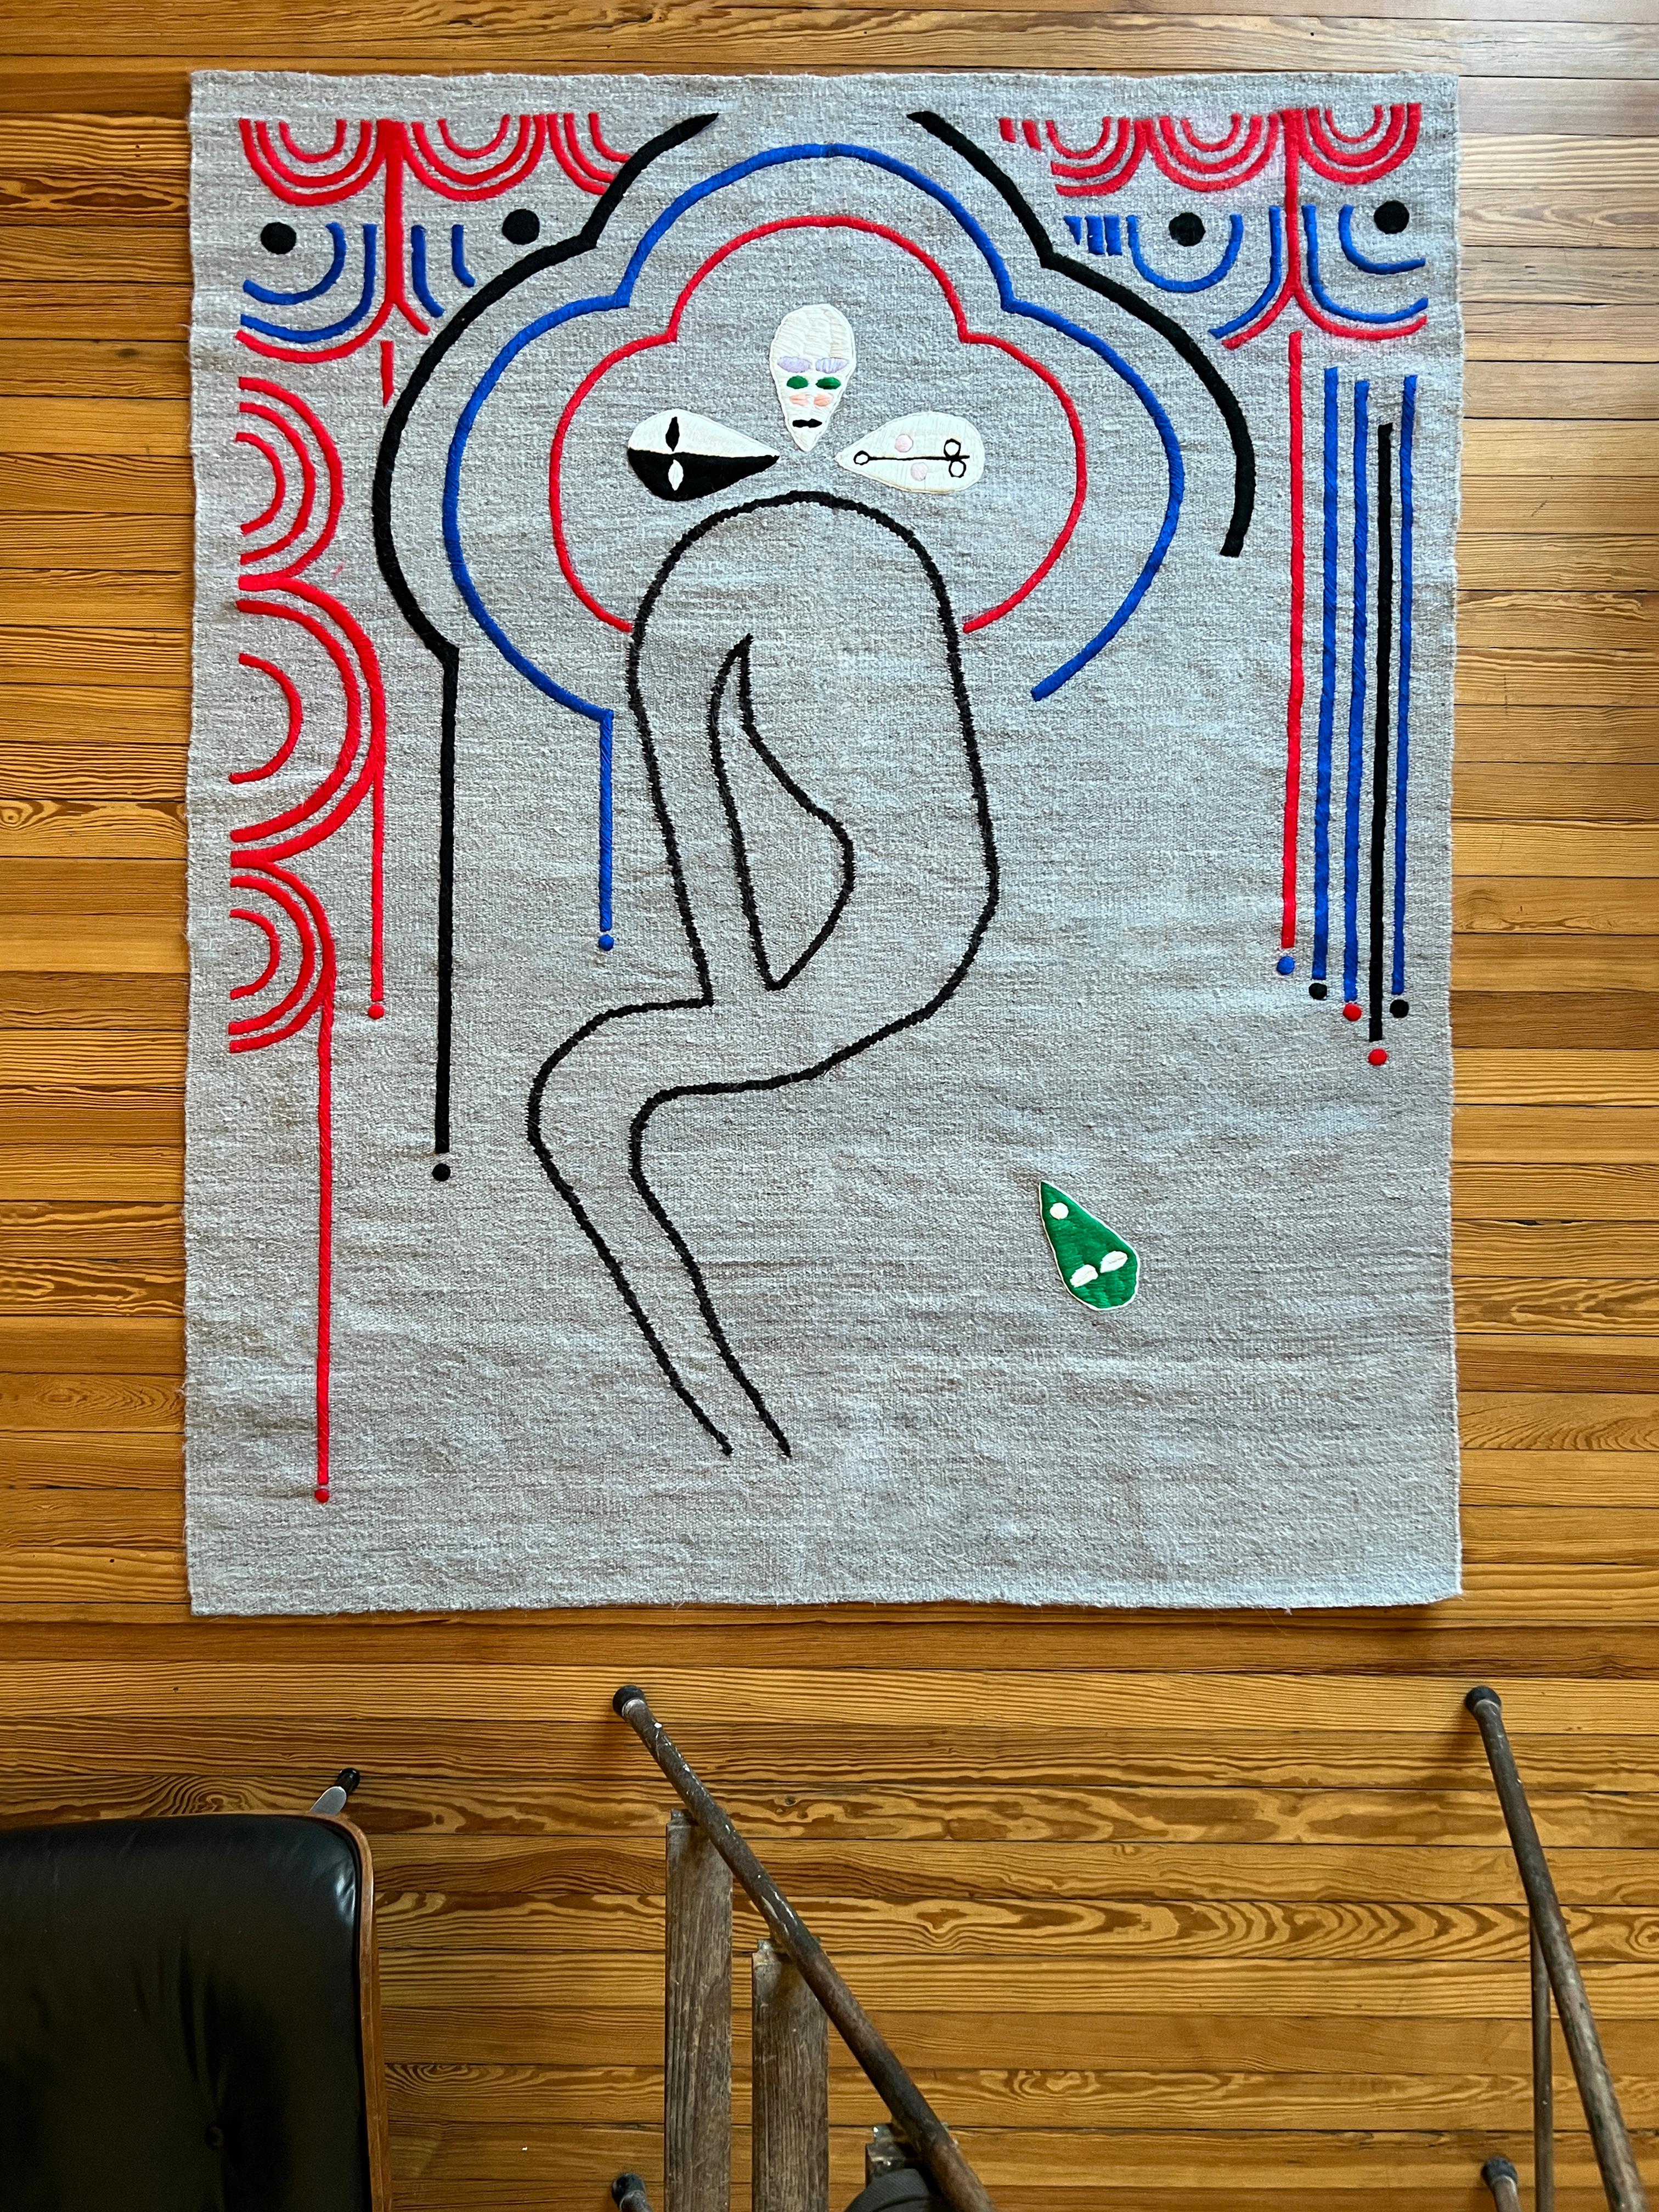 Adapted from the original artwork by Juan Tessi, Crónicas Incompletas Bis, 2019.

Limited edition of 15 handmade and unique rugs.   

LALANA RUGS is an applied arts initiative born from the desire to combine proposals by contemporary artists with